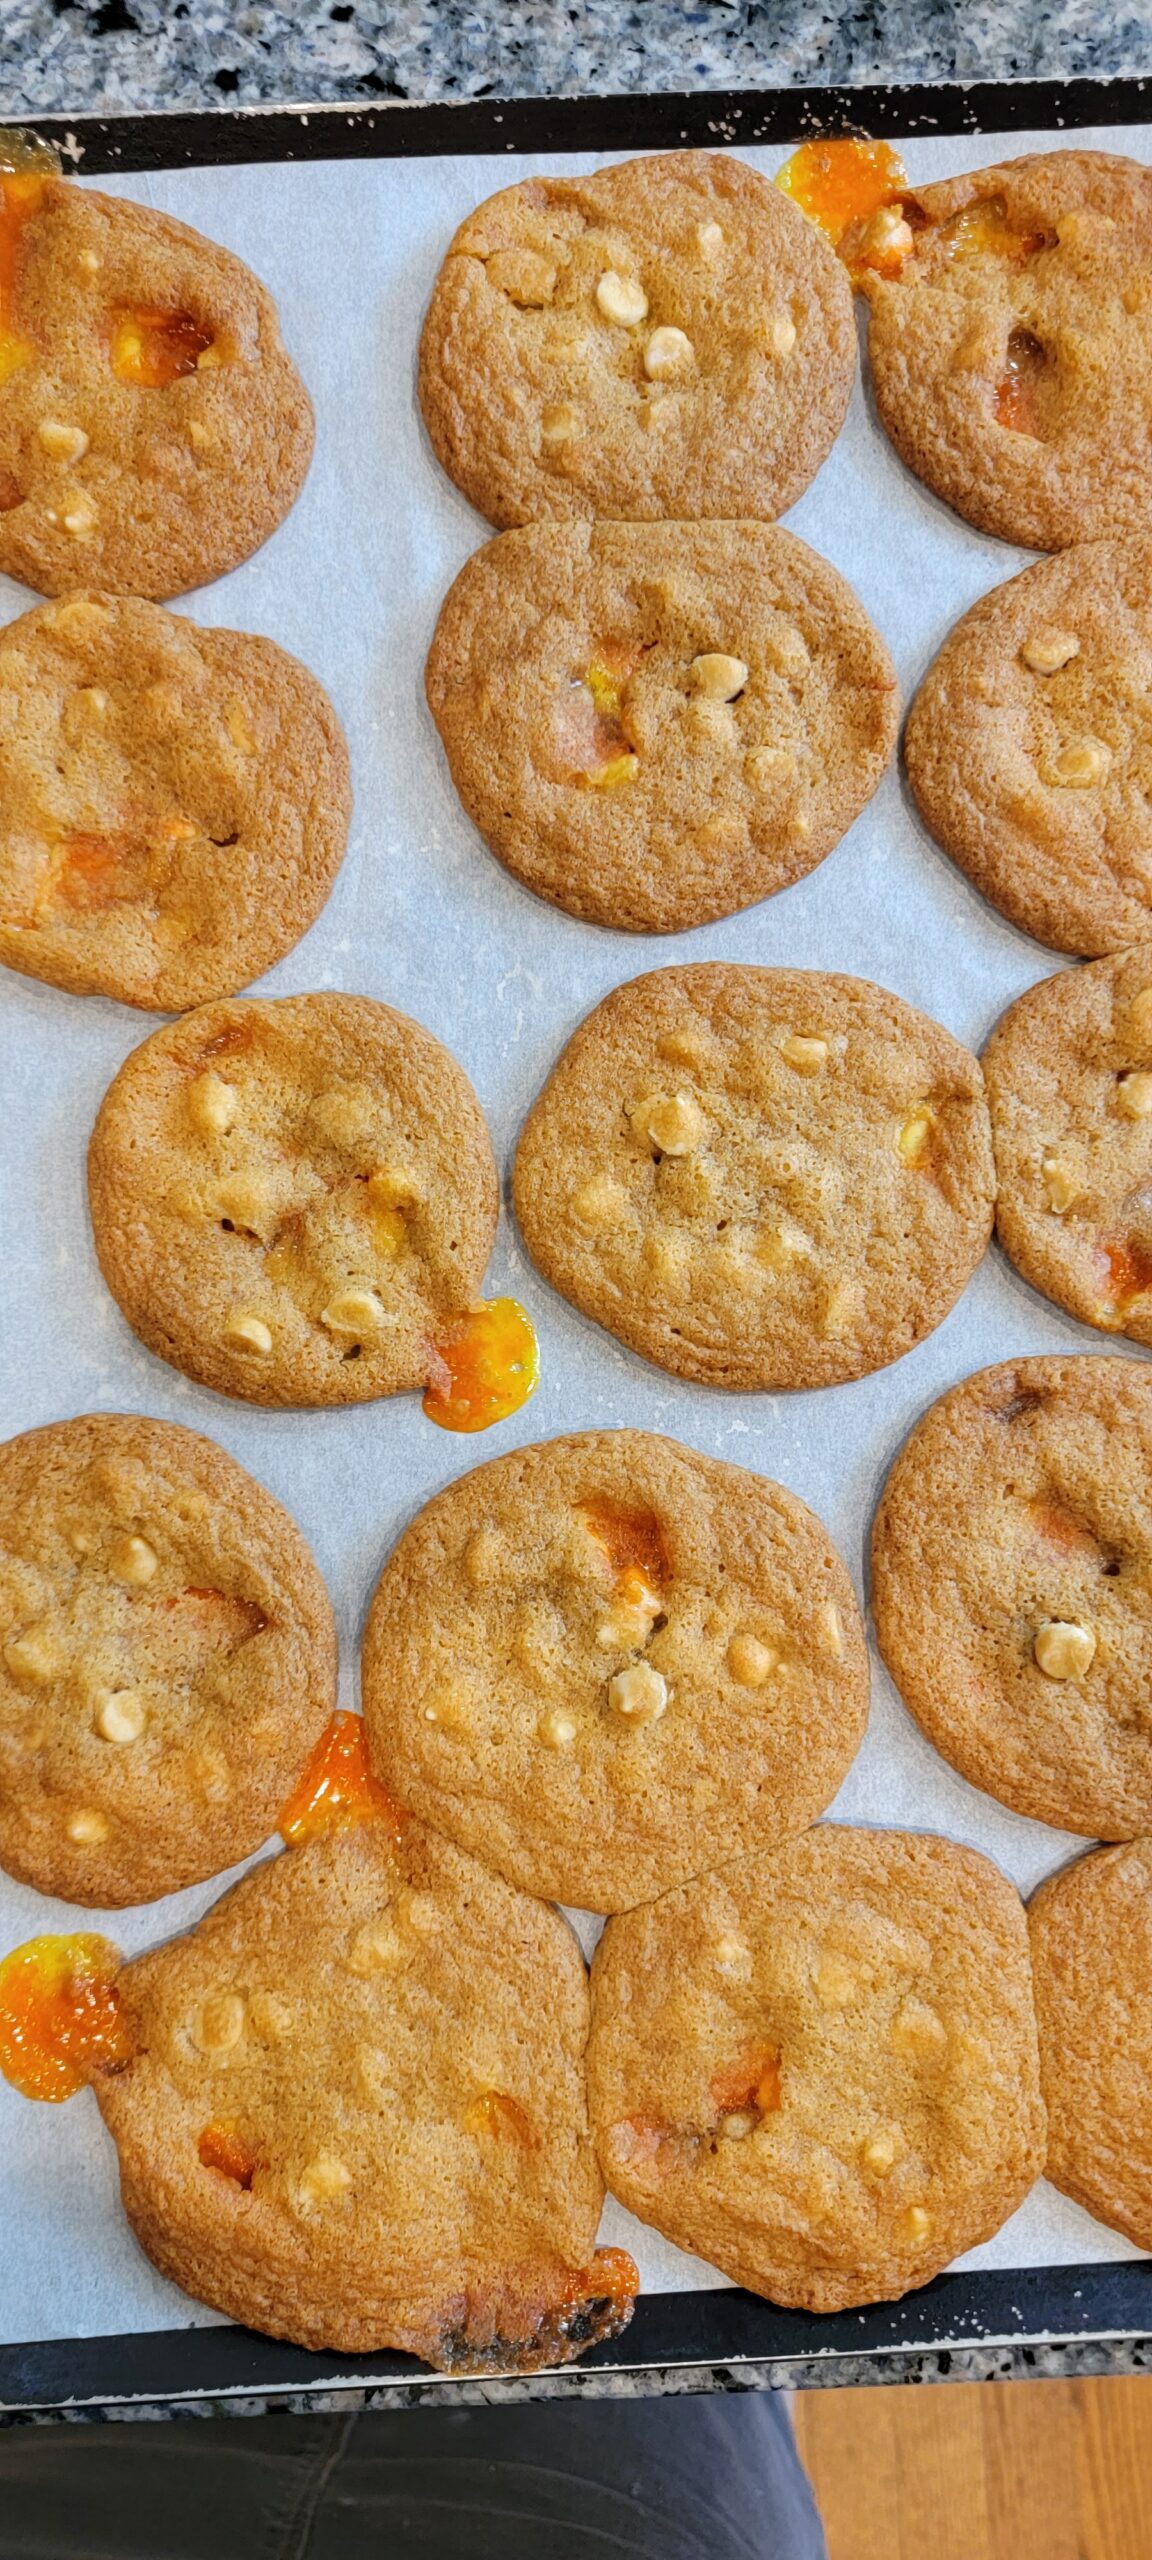 The first batch of Candy Corn and White Chocolate Chip Cookies